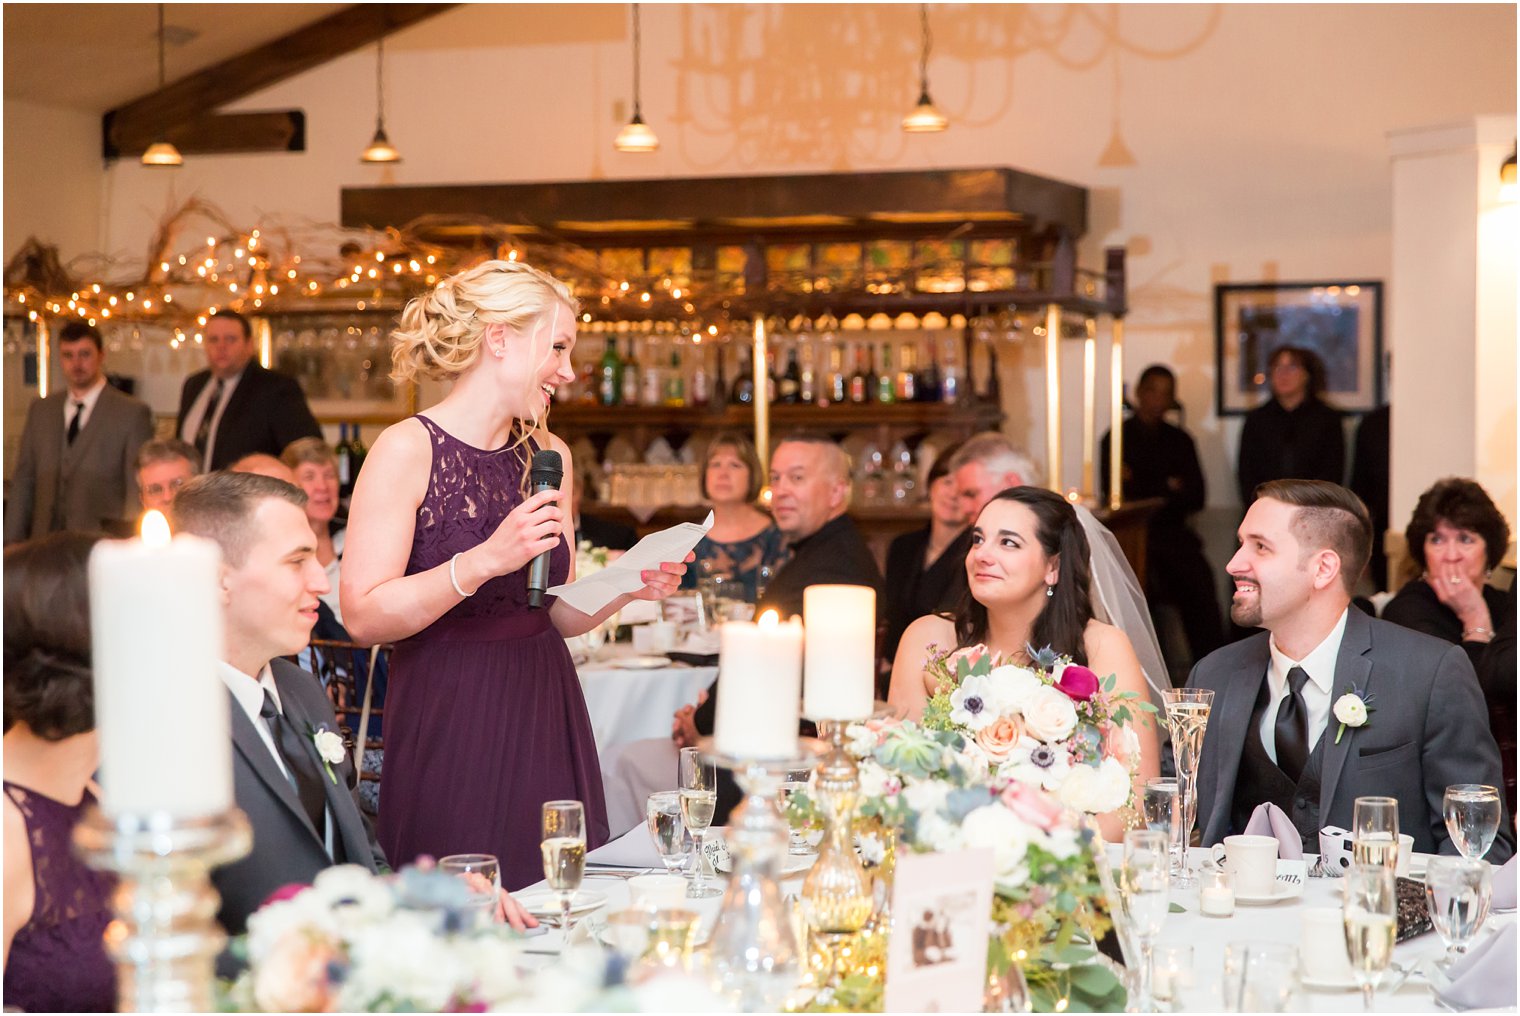 Maid of honor speech at New Hope, PA wedding | Photo by PA Wedding Photographers Idalia Photography